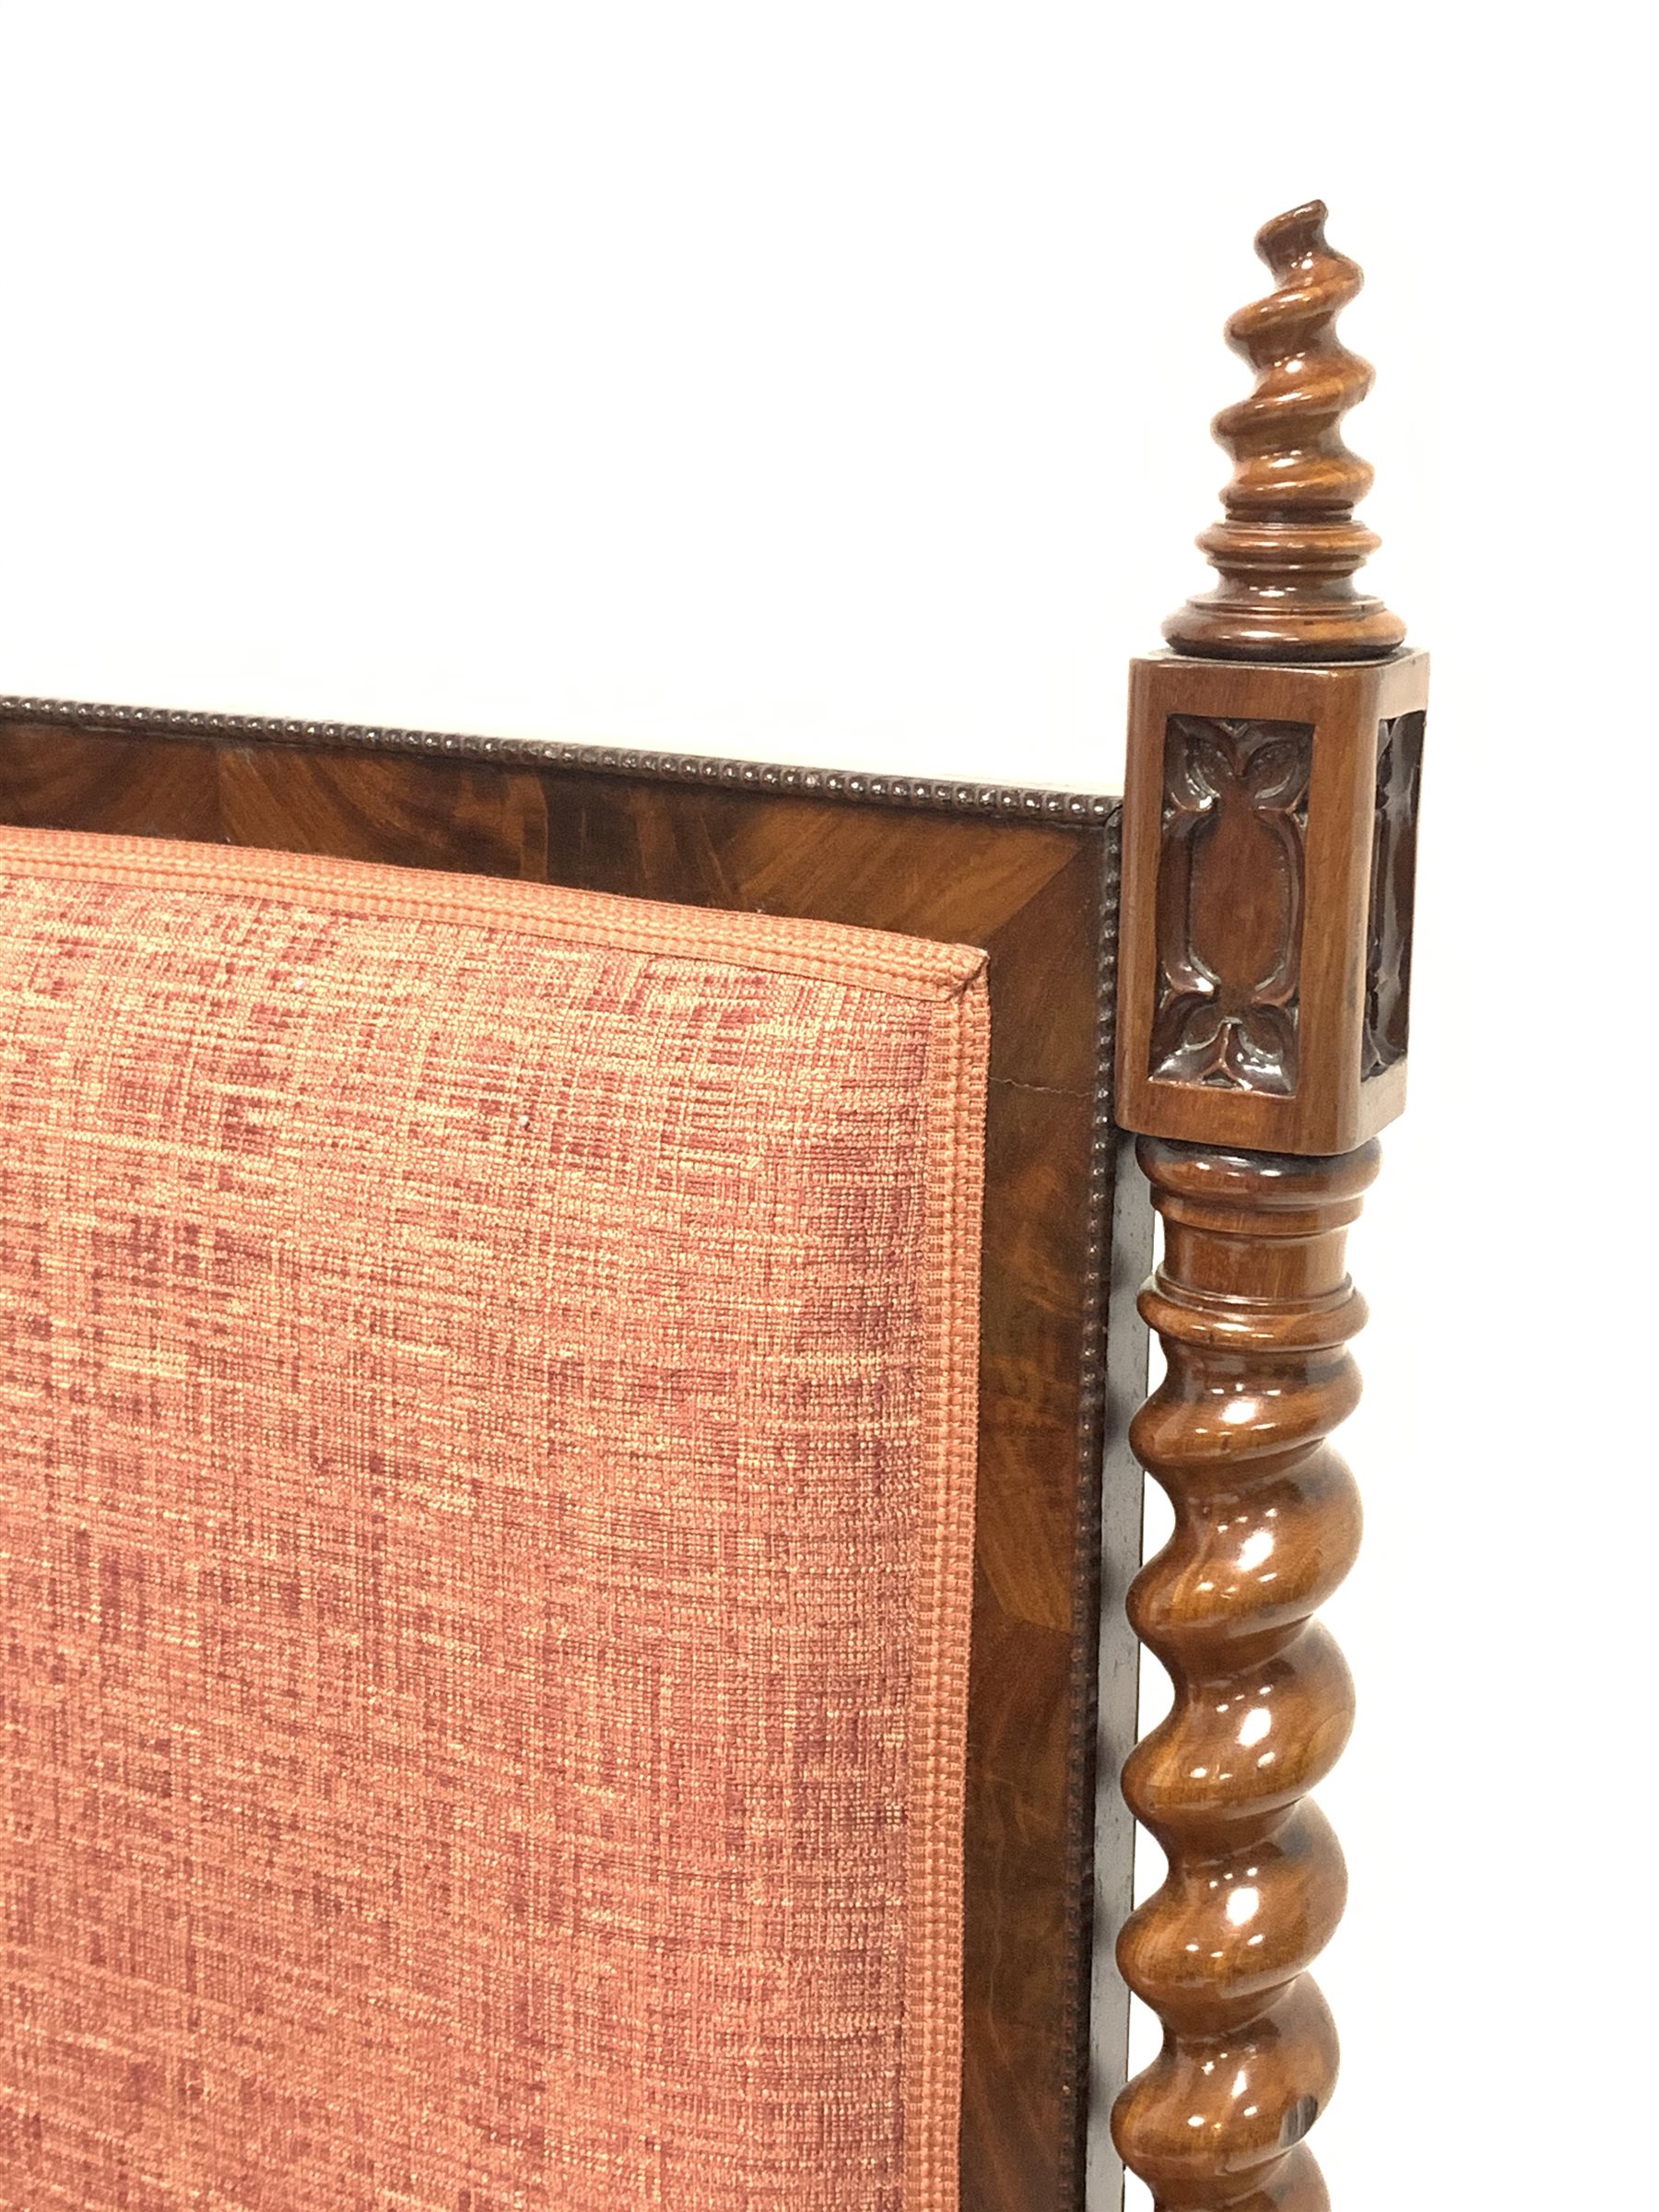 19th century Puginesque mahogany throne chair, the upholstered back surrounded by figured mahogany b - Image 3 of 12